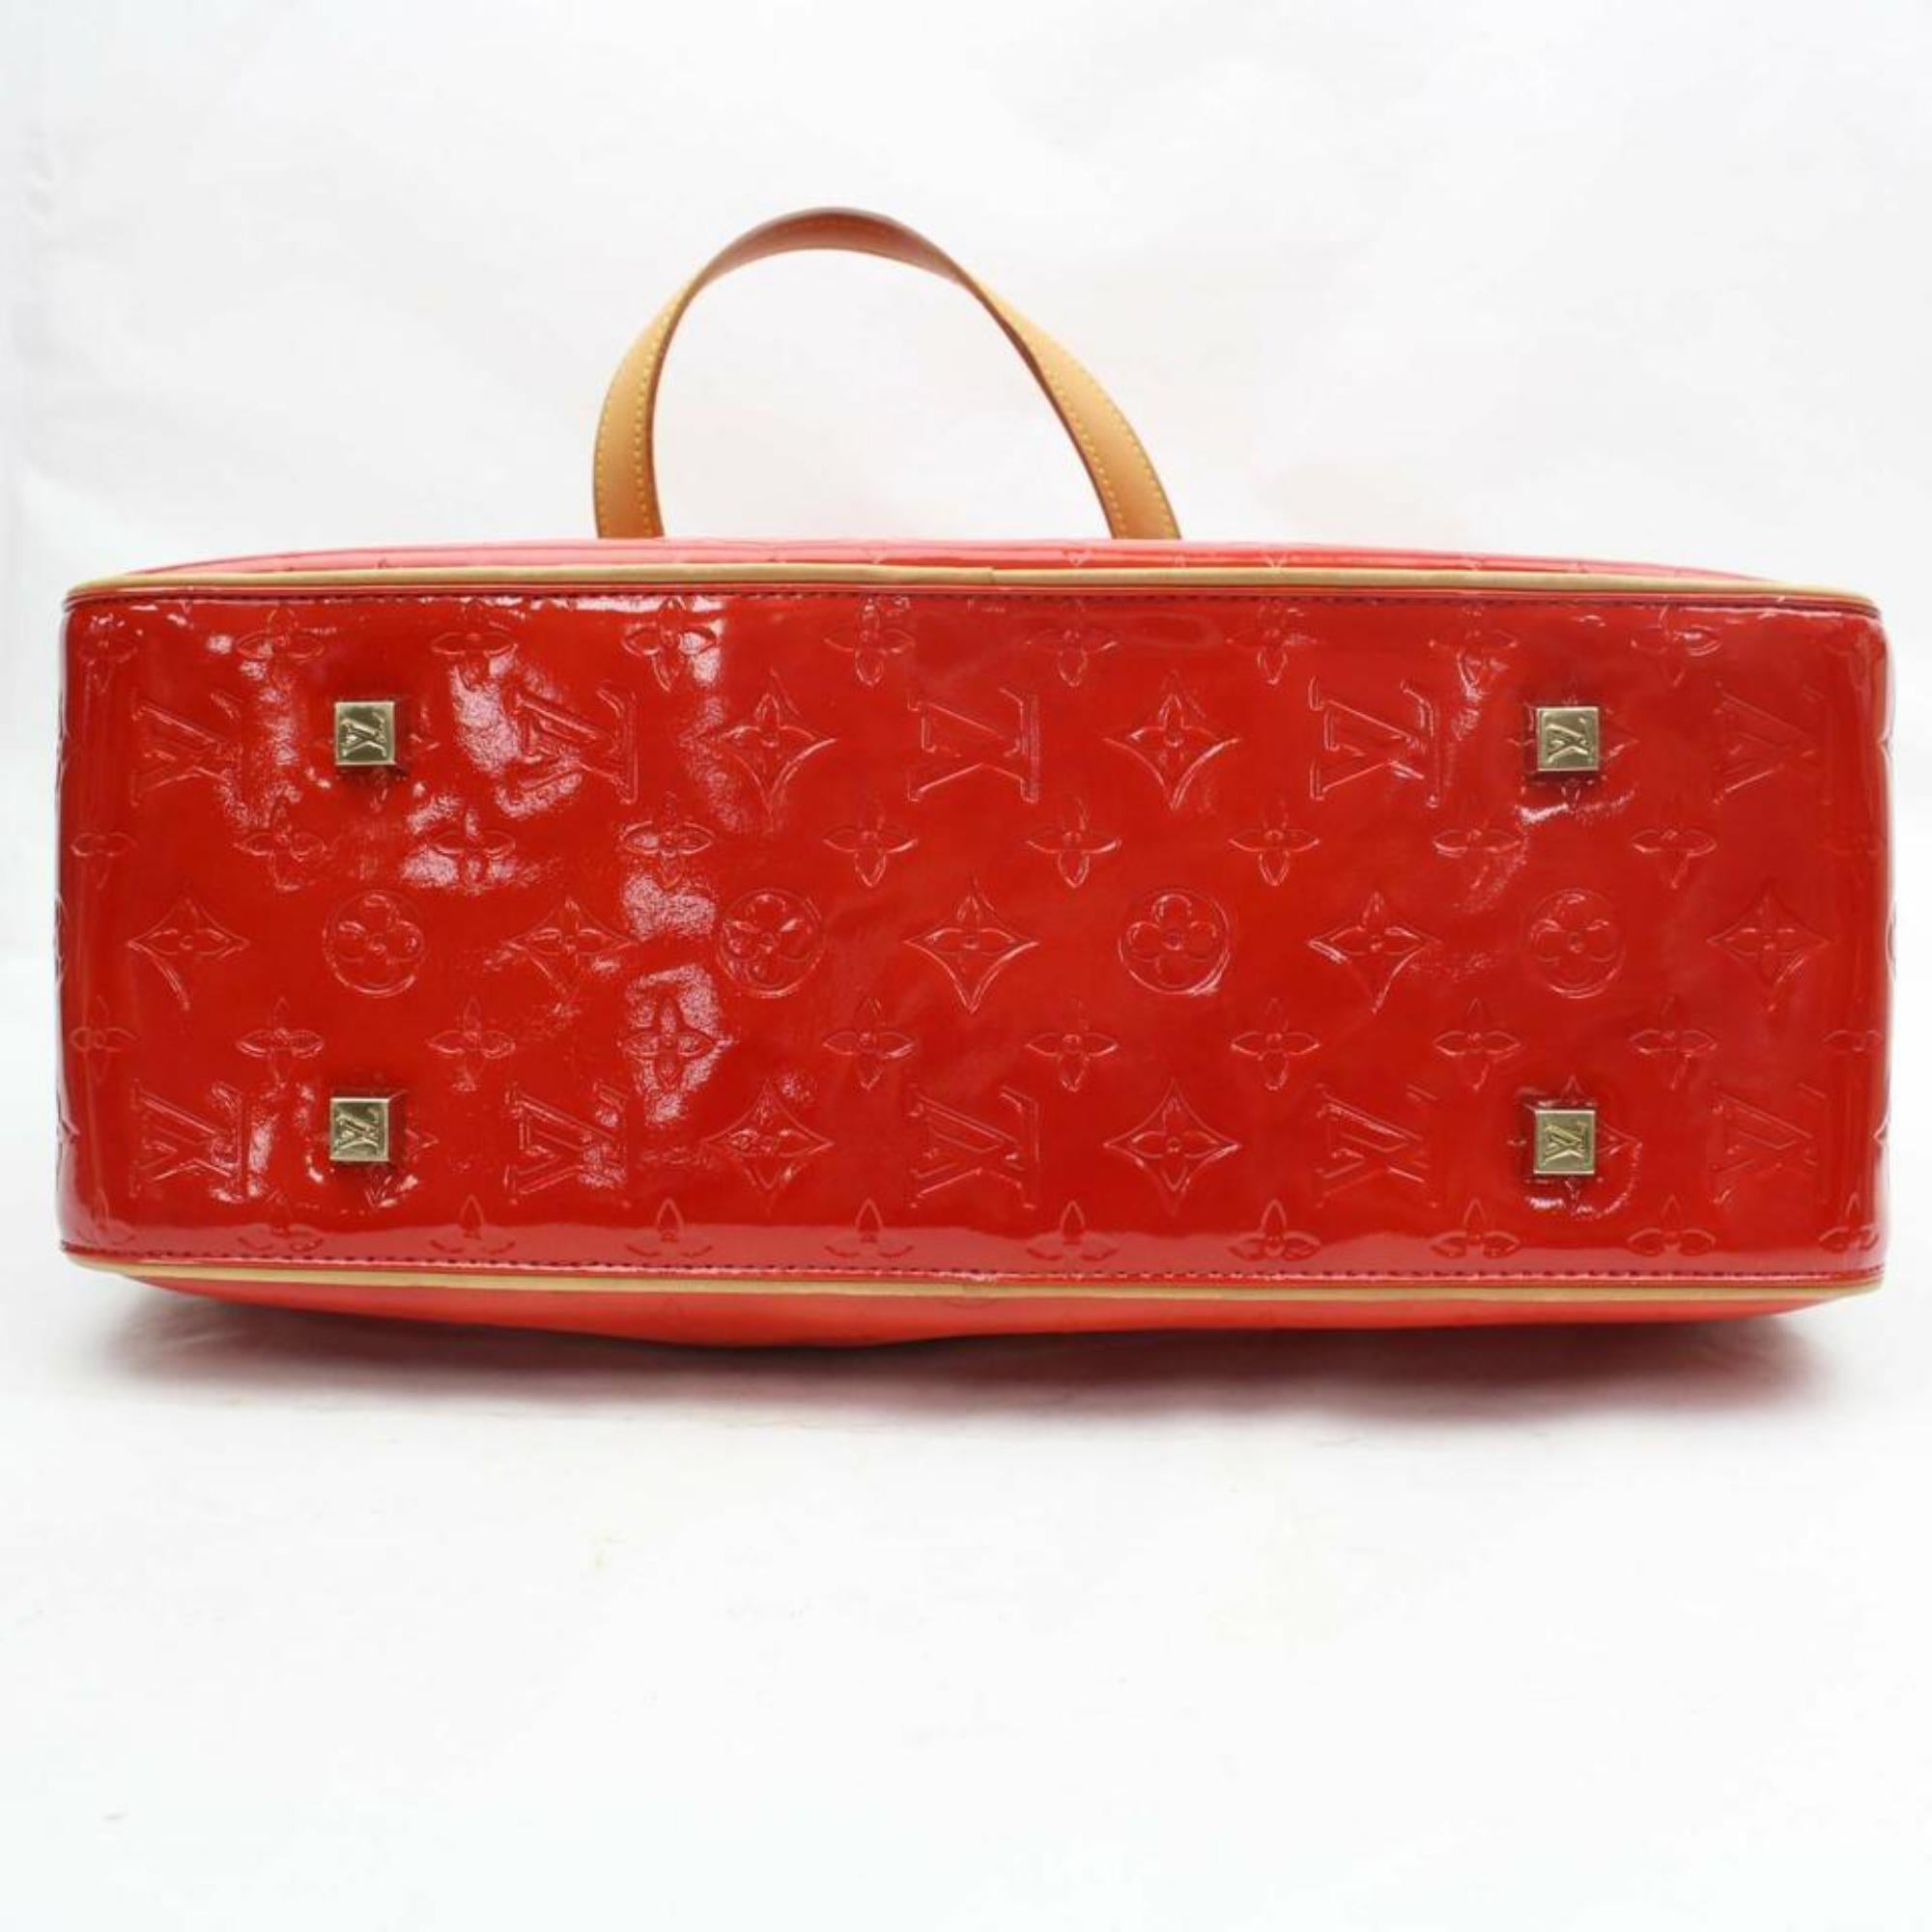 Women's Louis Vuitton Vernis Zip Tote 870301 Red Patent Leather Weekend/Travel BAG For Sale